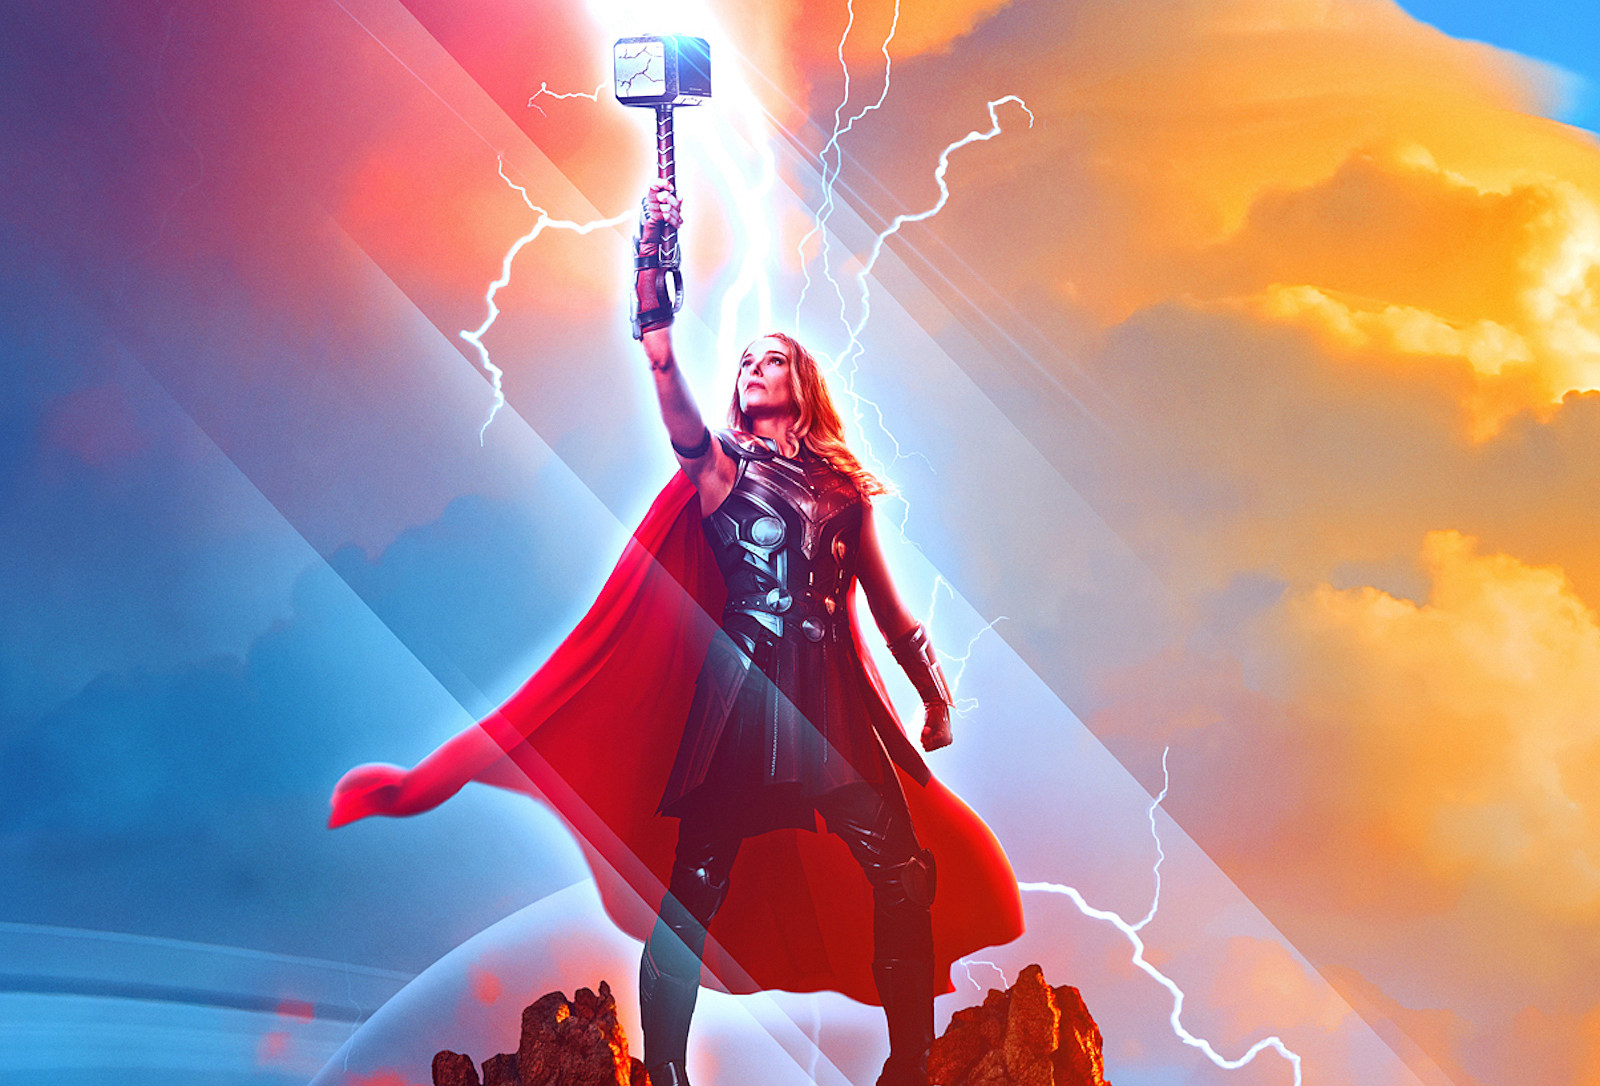 Thor: Ragnarok pitches superheroes against science (and how does